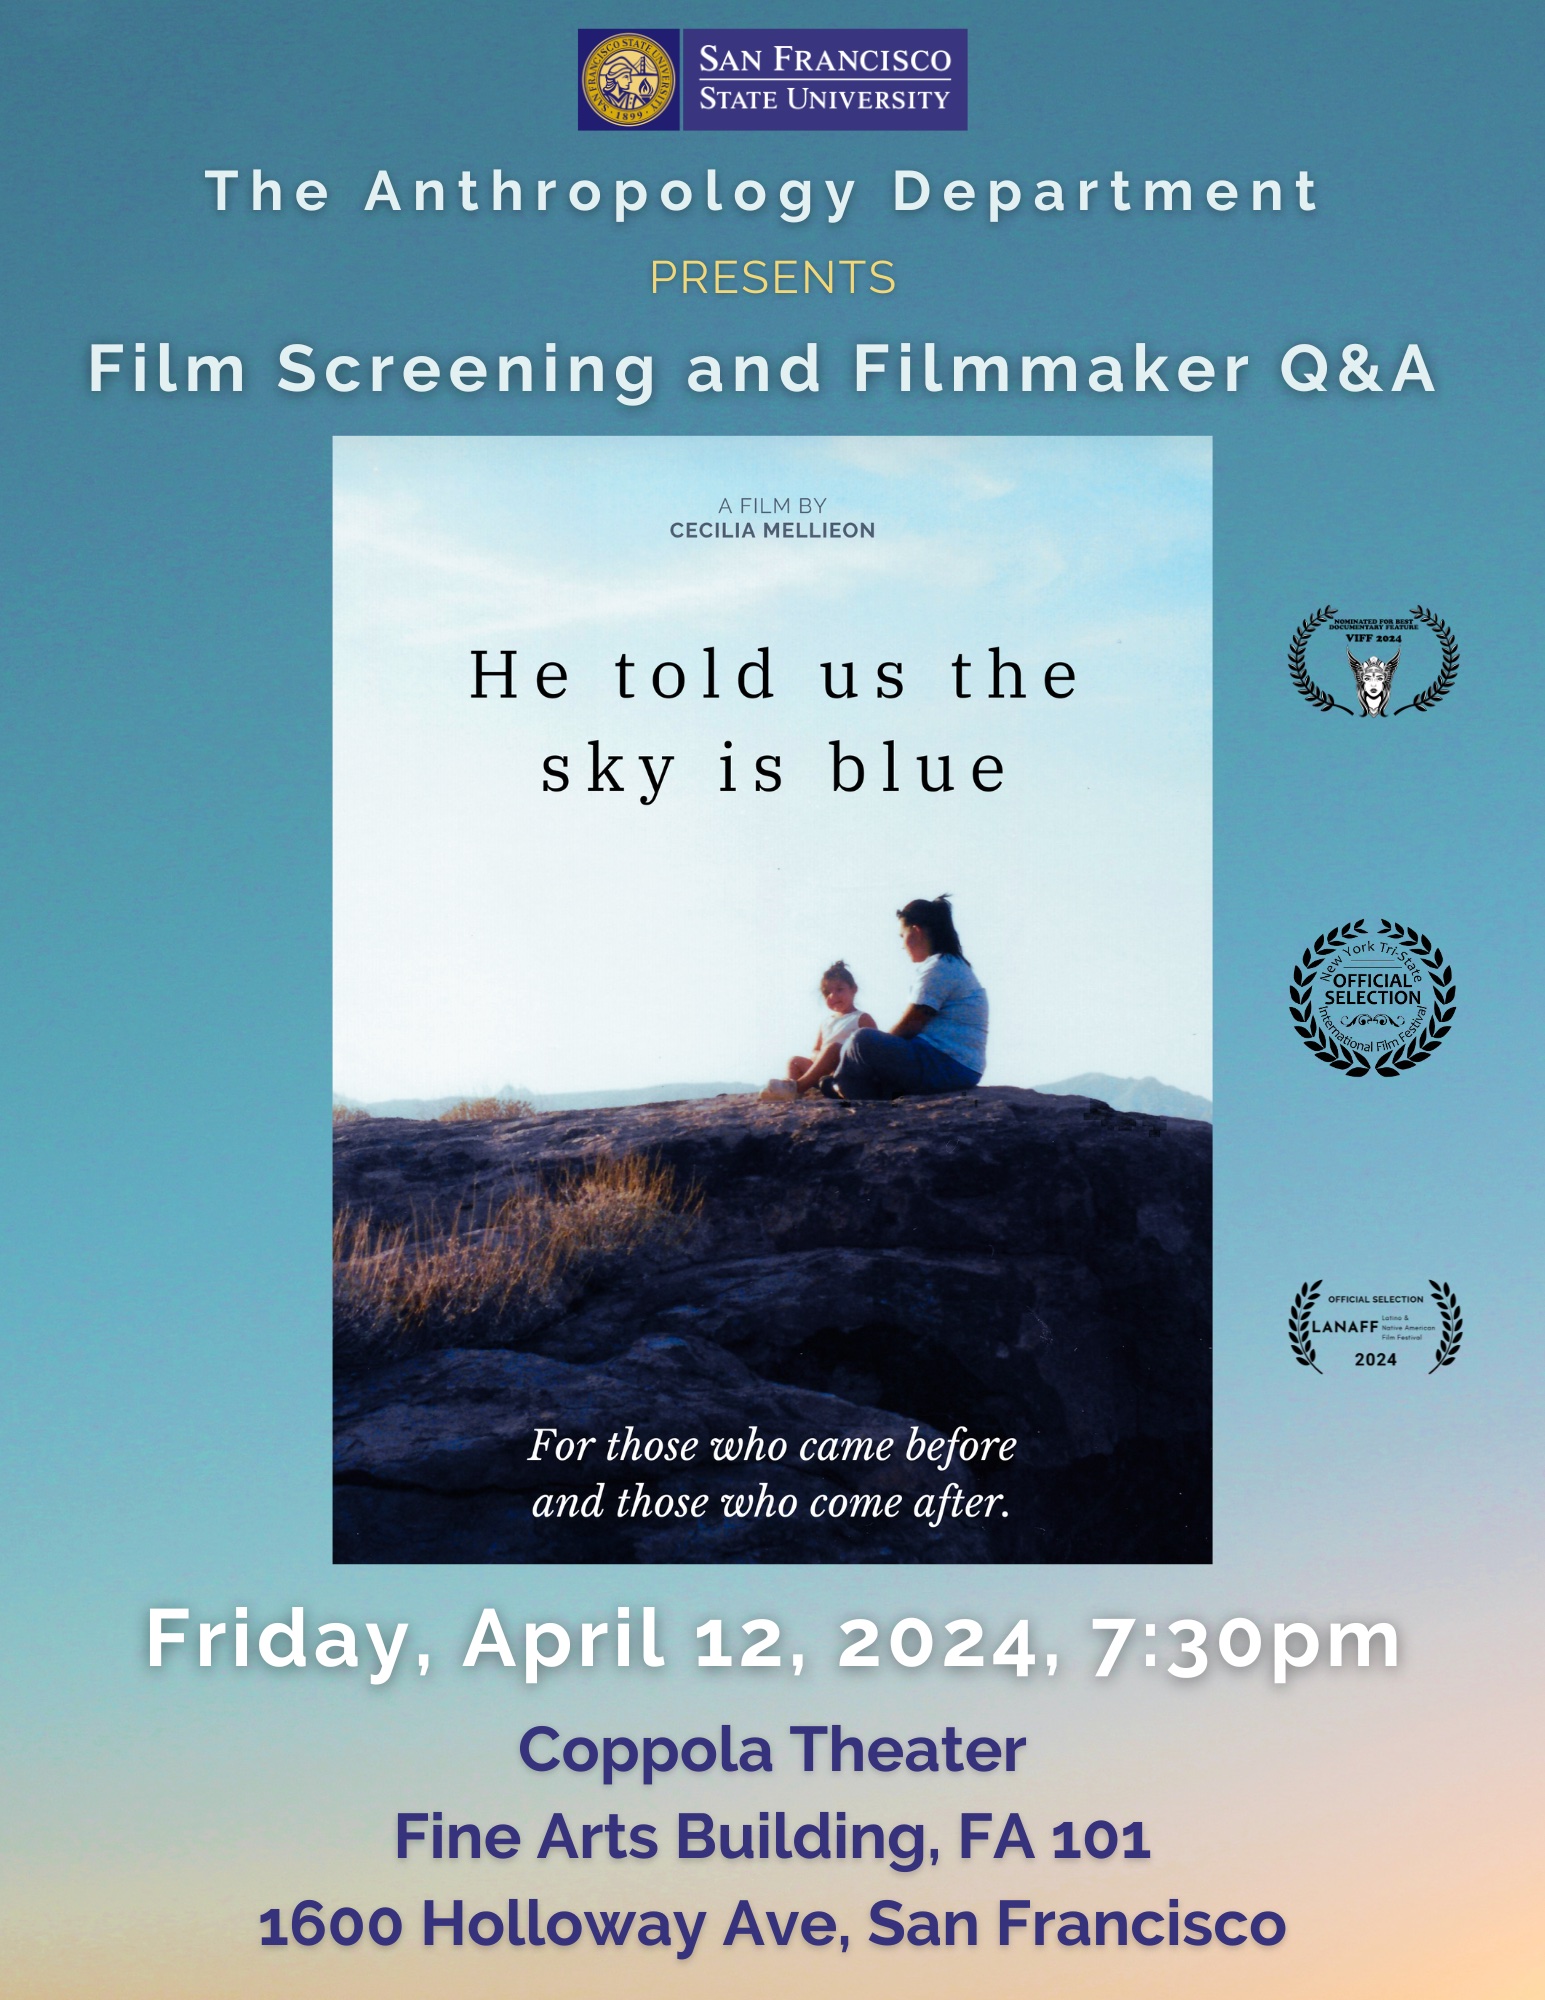 He told us the sky is blue film screening flyer information